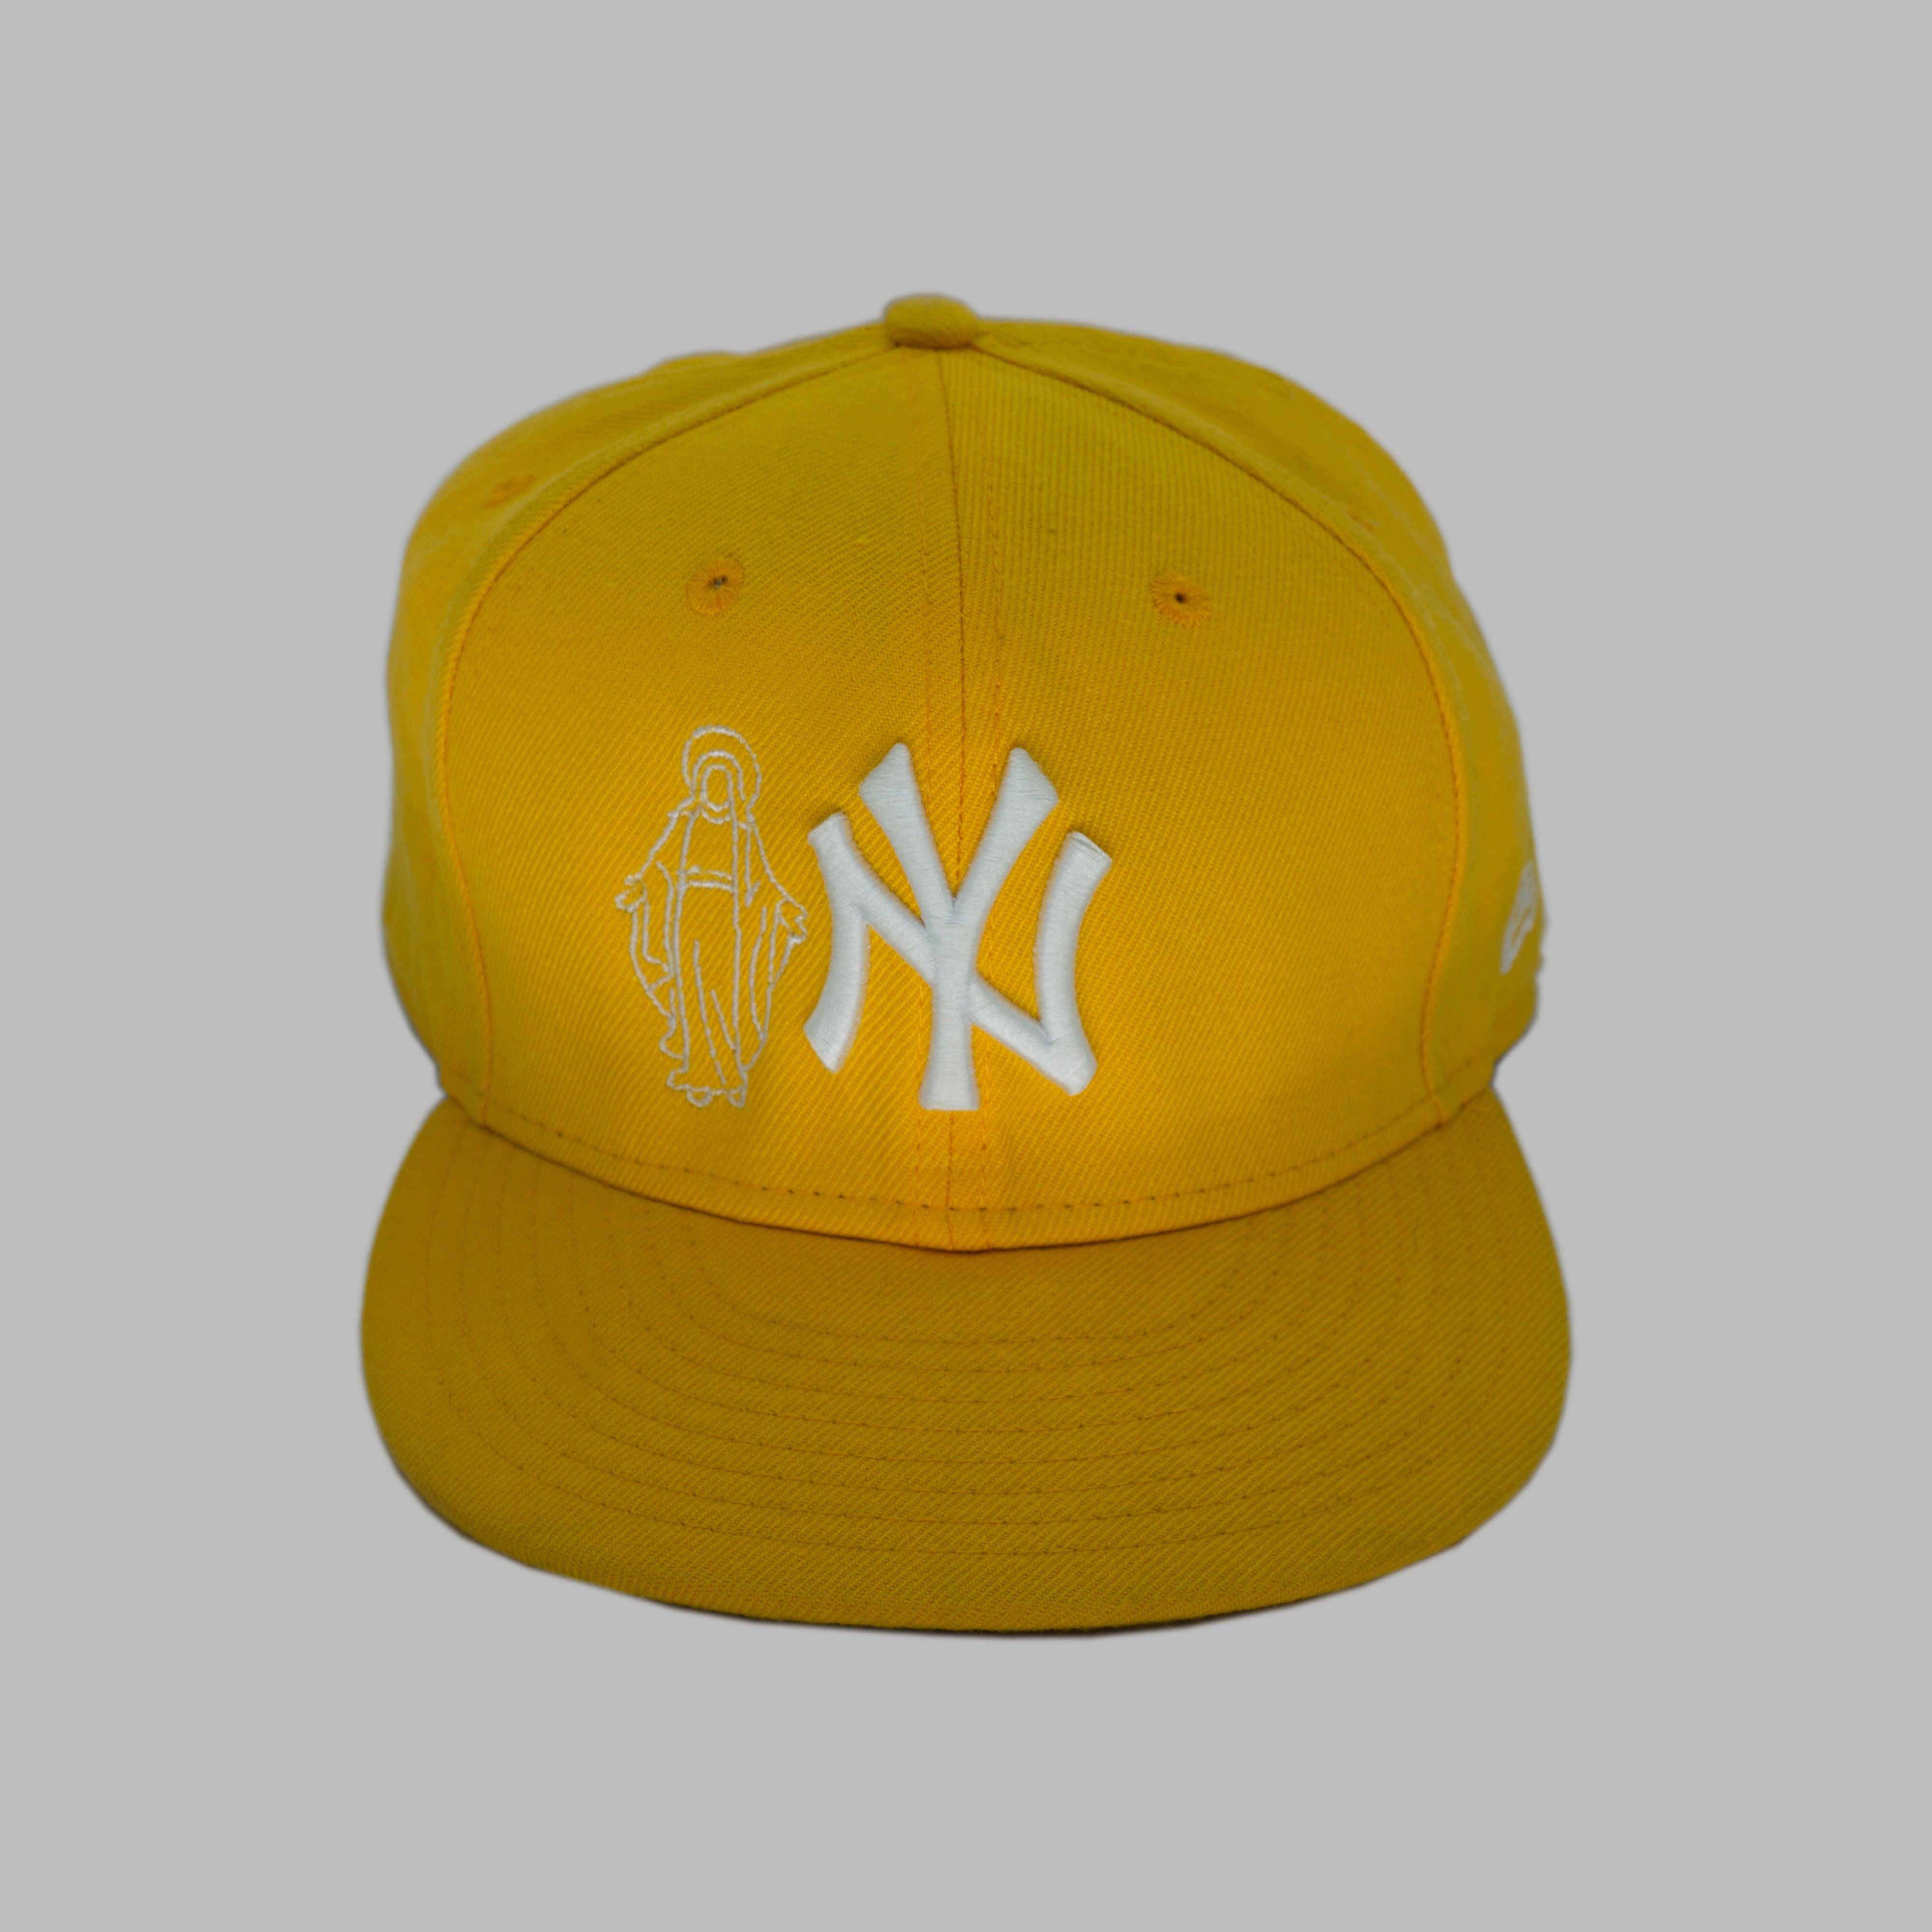 YELLOW HOLY FITTED (size 8)